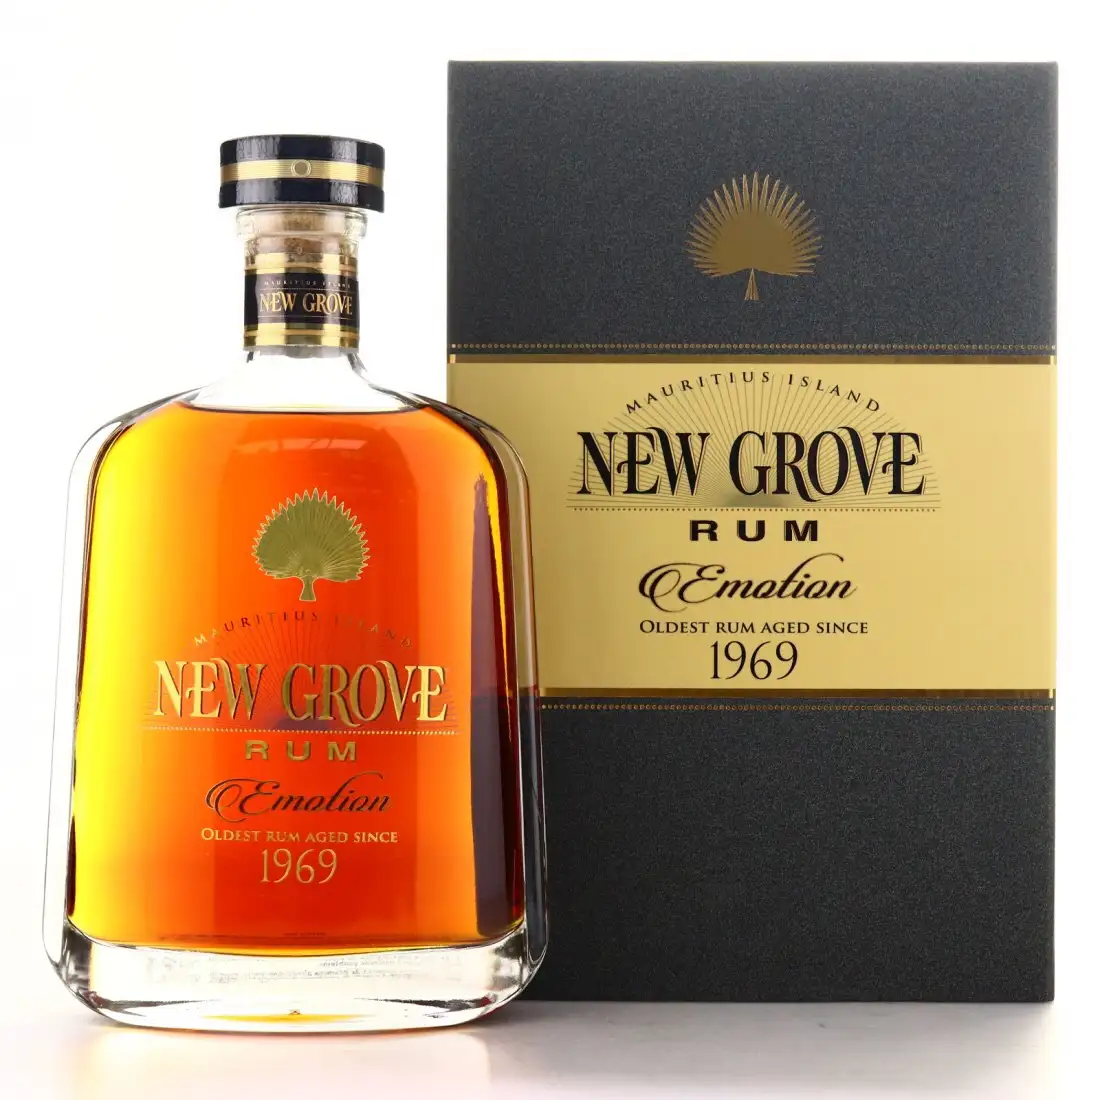 Image of the front of the bottle of the rum New Grove Emotion